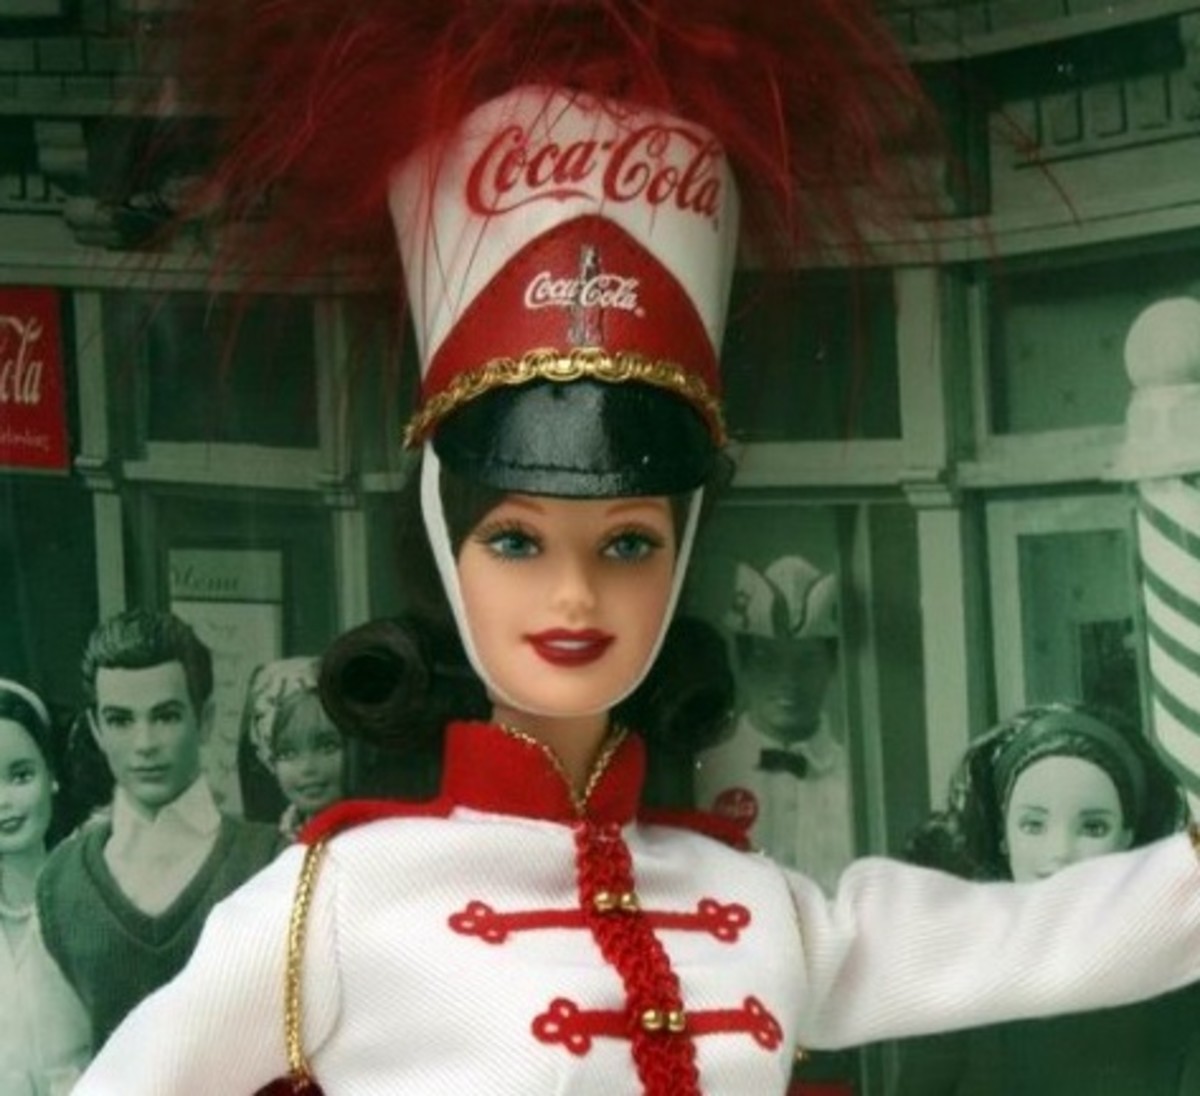 Top Toys - Great Gifts Coca-Cola Dolls - Barbie and Madame Alexander| Buy Online